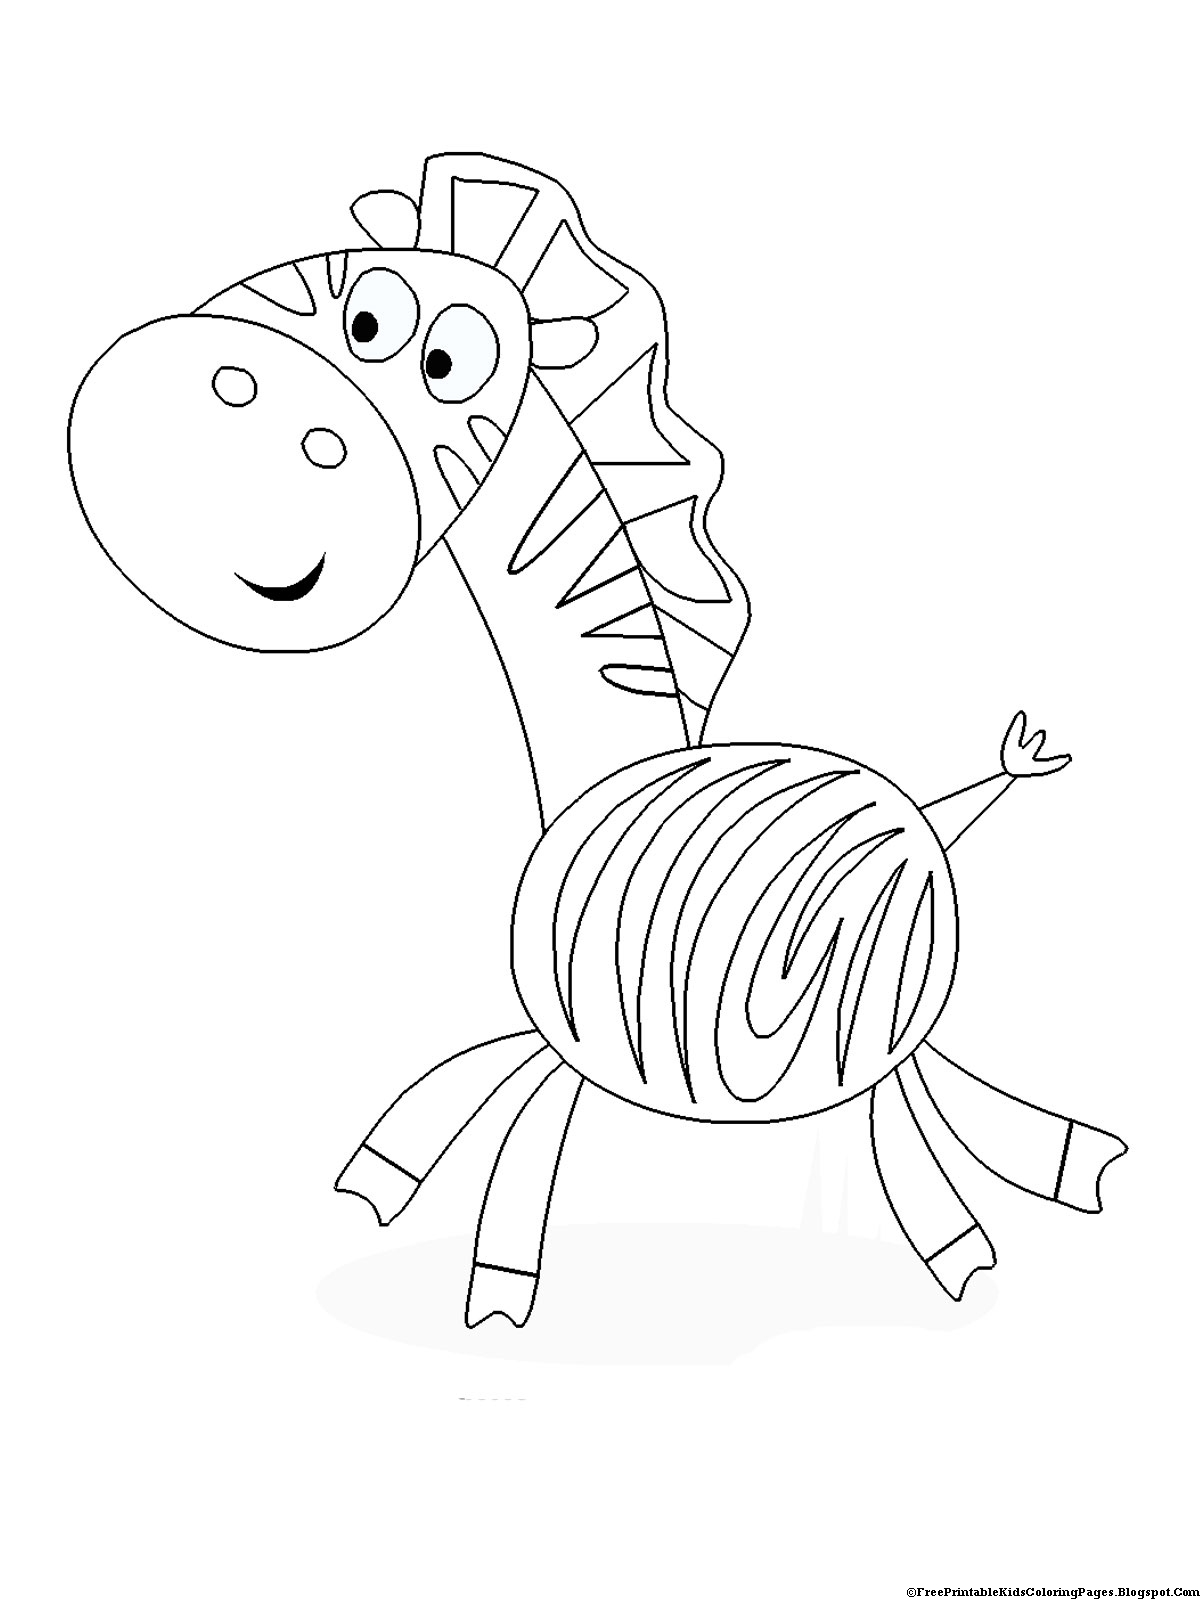 Download Zebra Coloring Pages - Free Printable Kids Coloring Pages